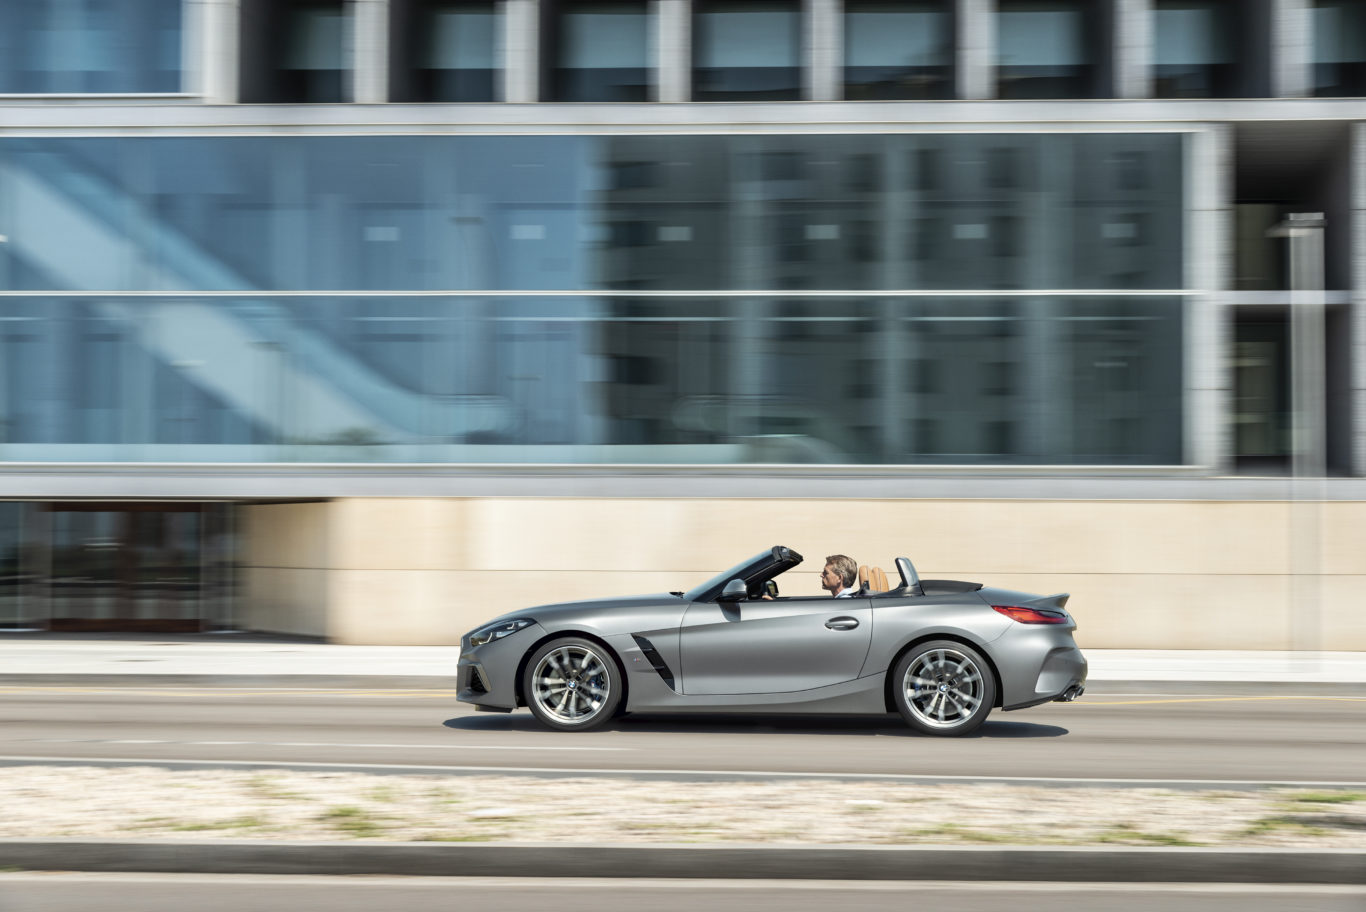 The new Z4 is expected to go on sale early next year